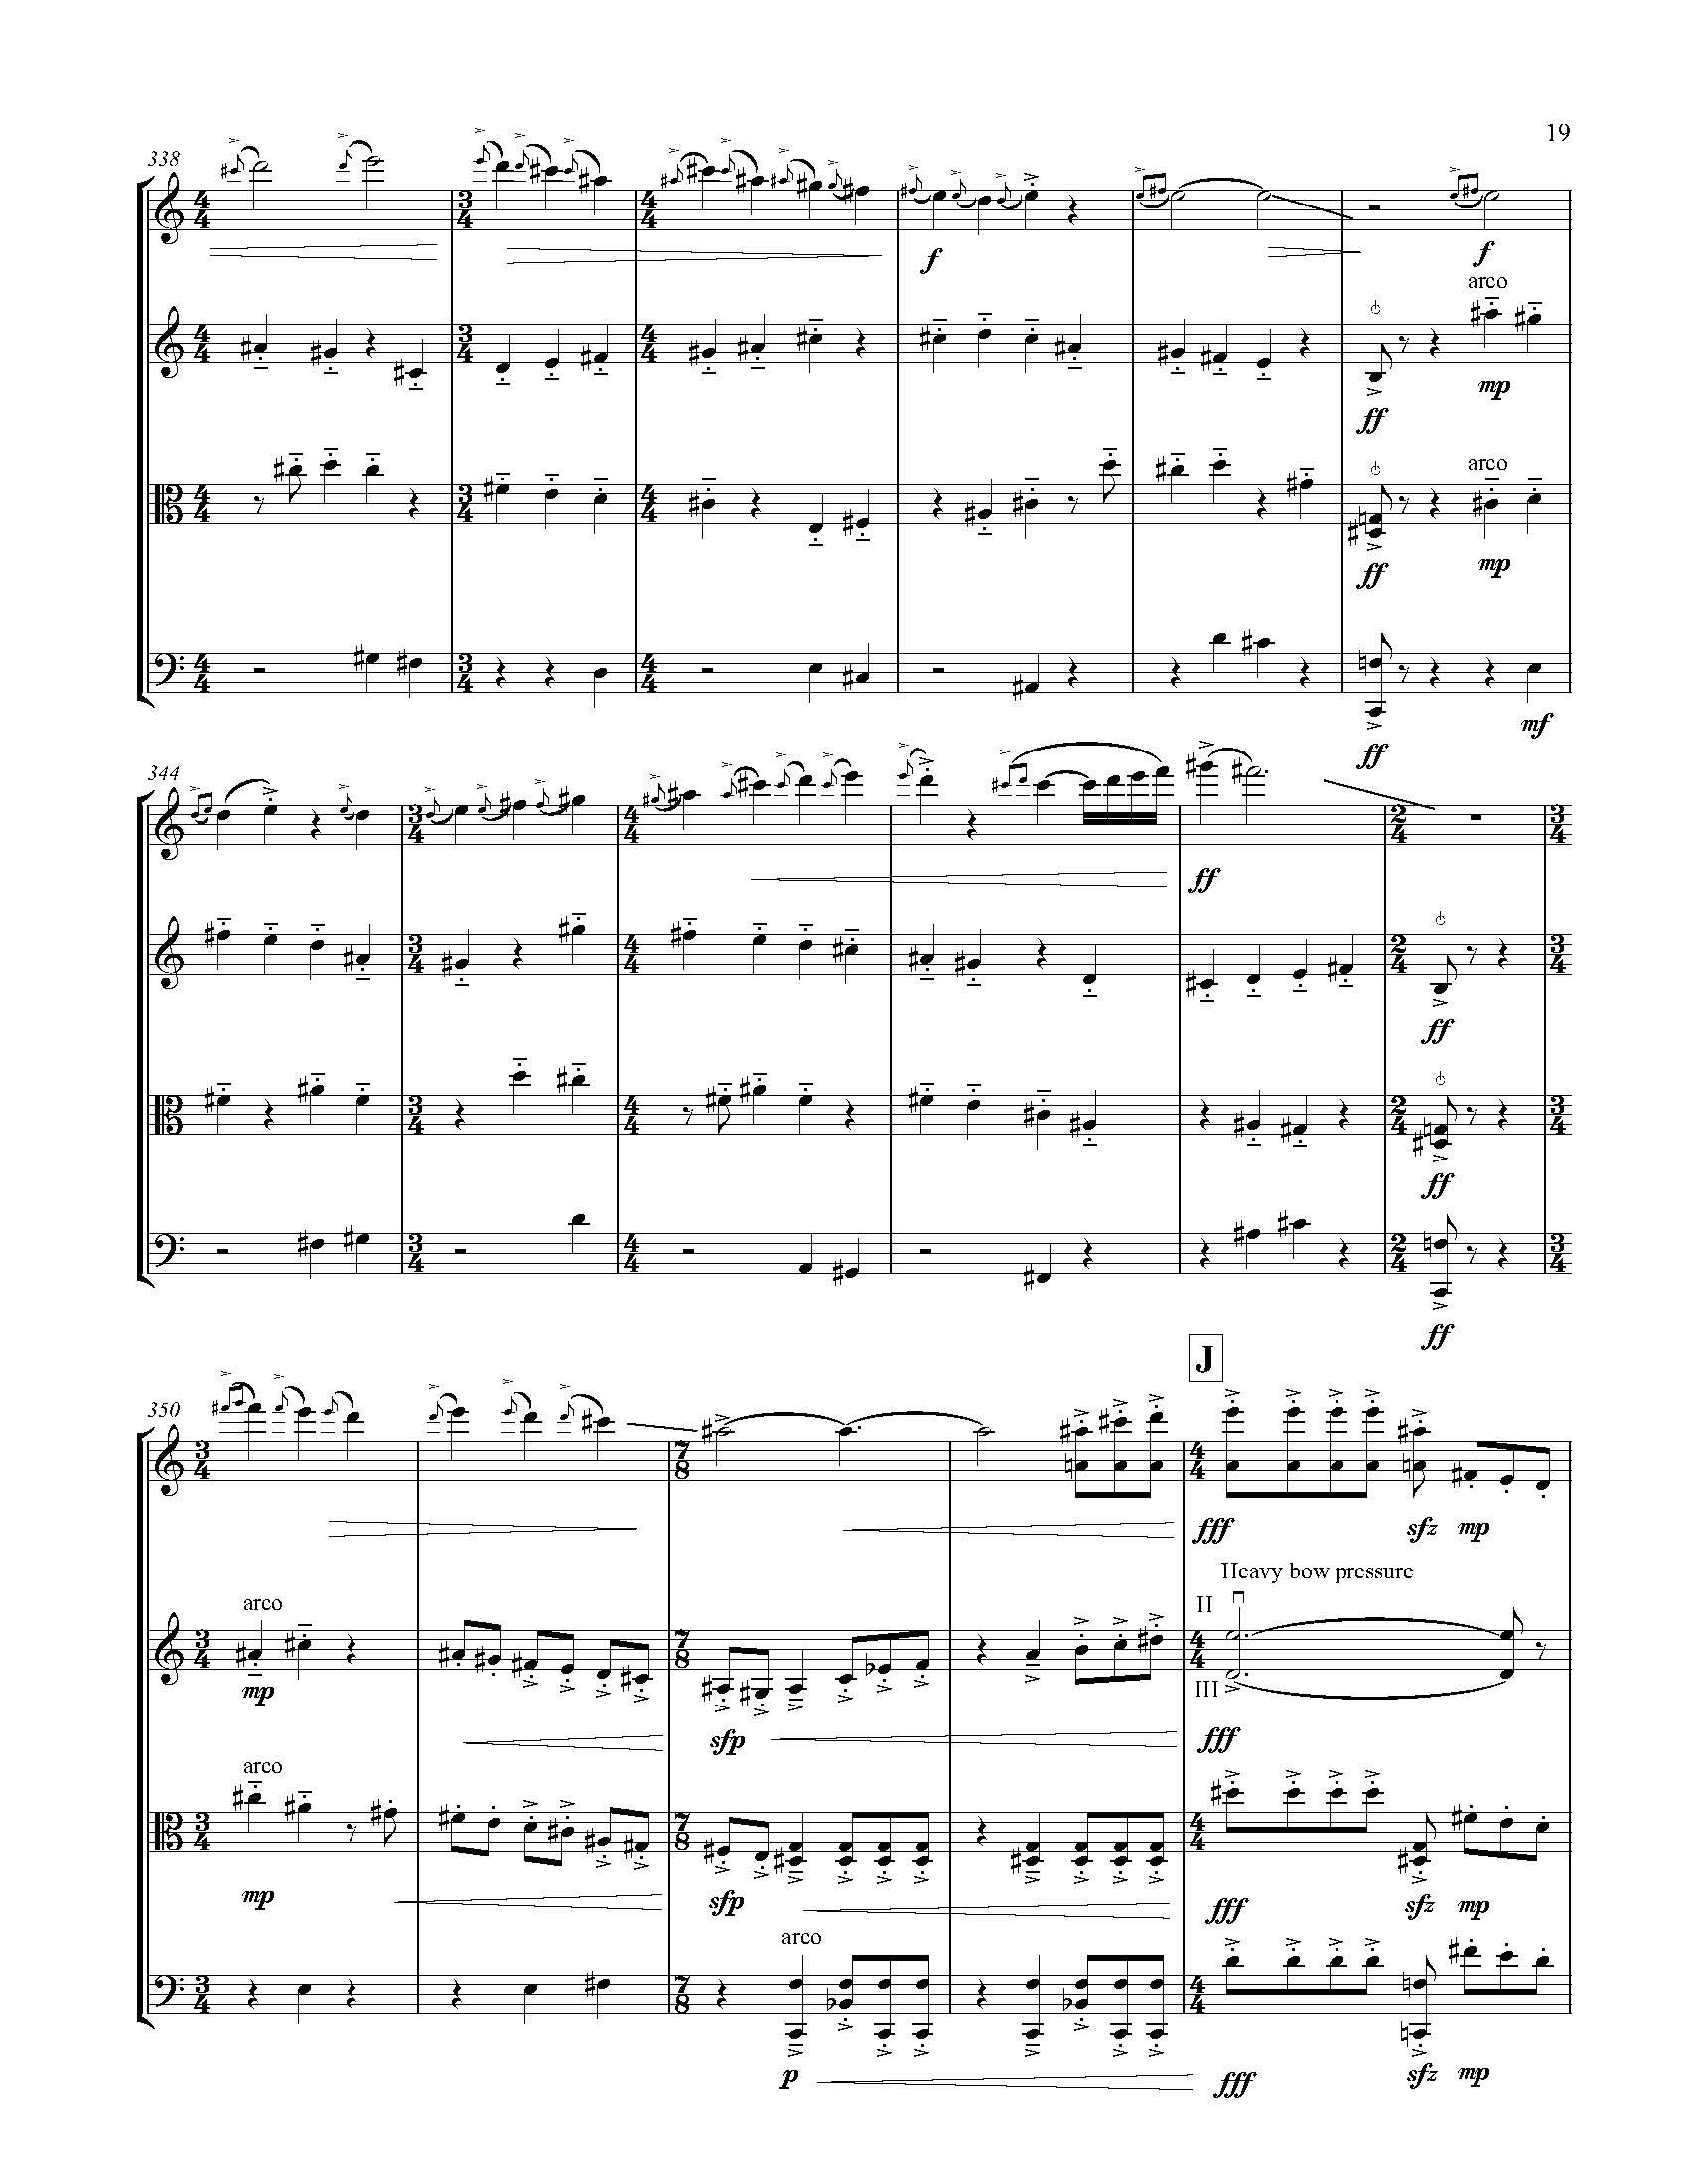 A Country of Vast Designs - Complete Score_Page_25.jpg